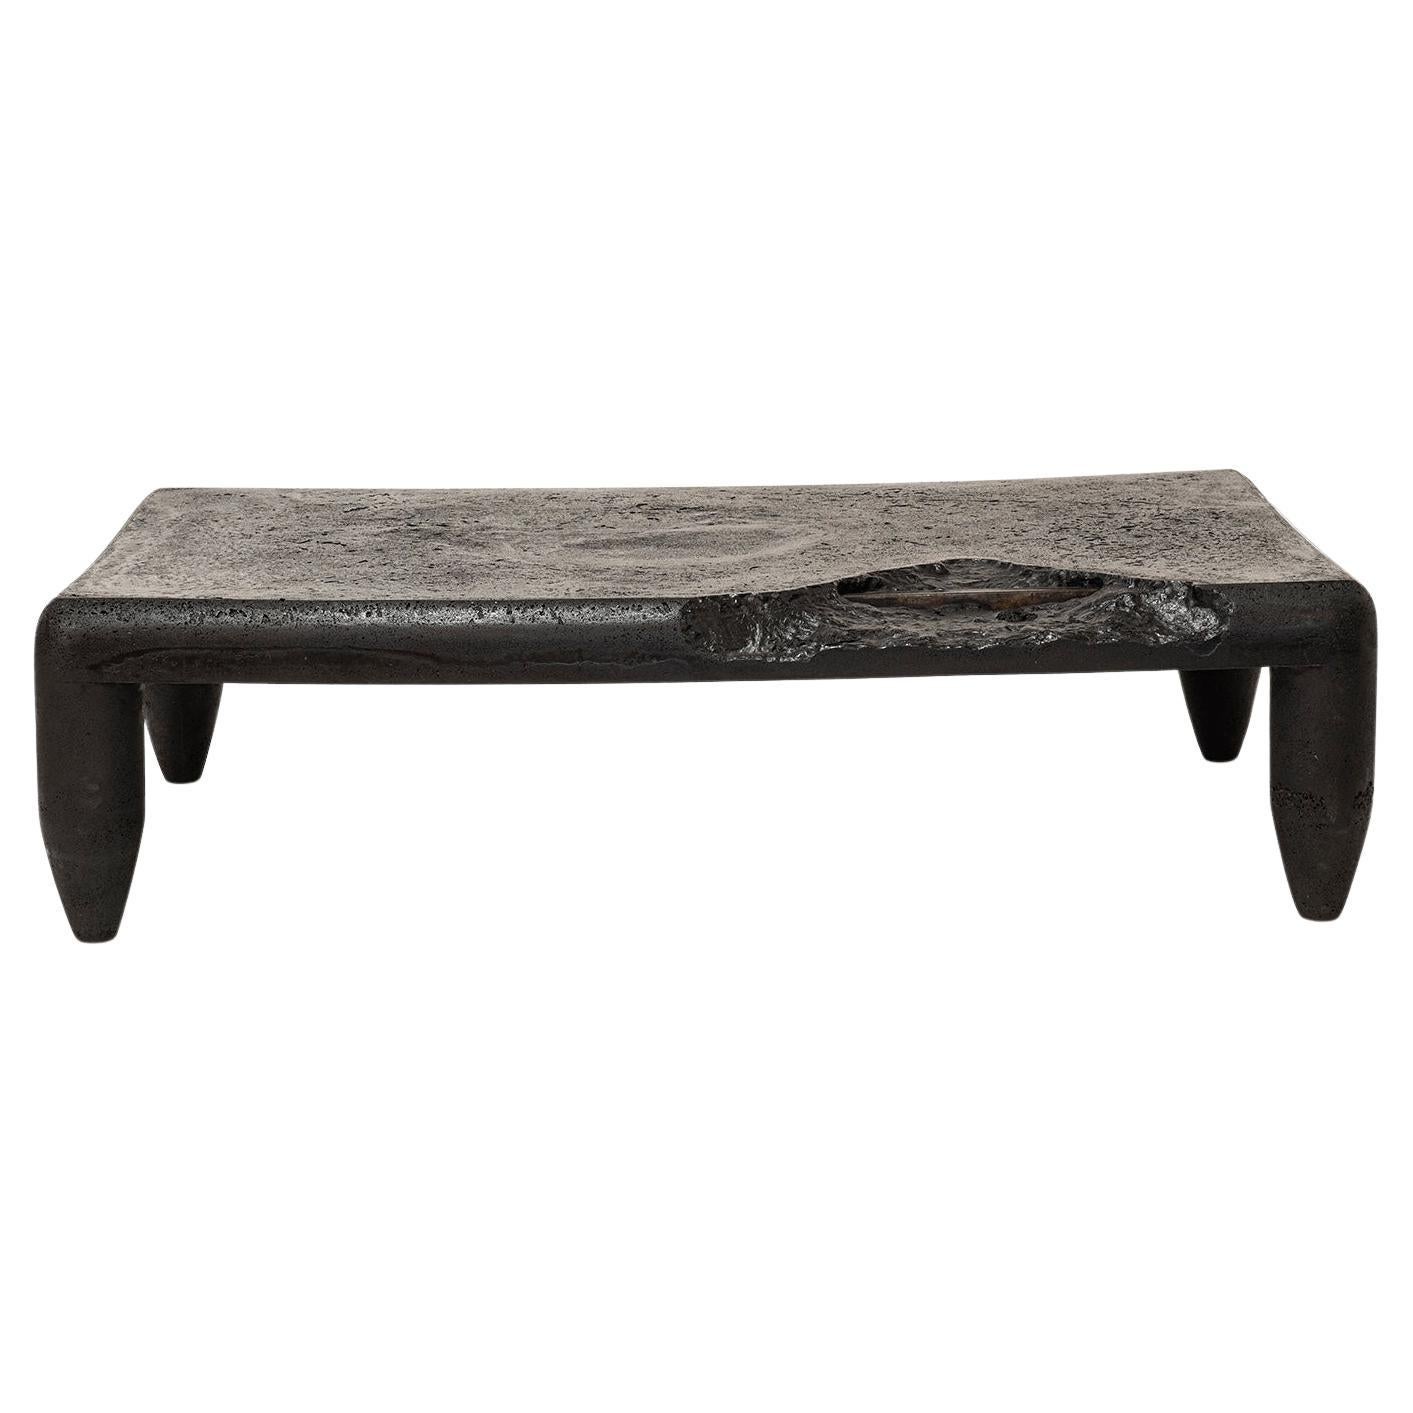 Black Modern/Contemporary Blackened Resin Composite Steel Coffee Table Fissured